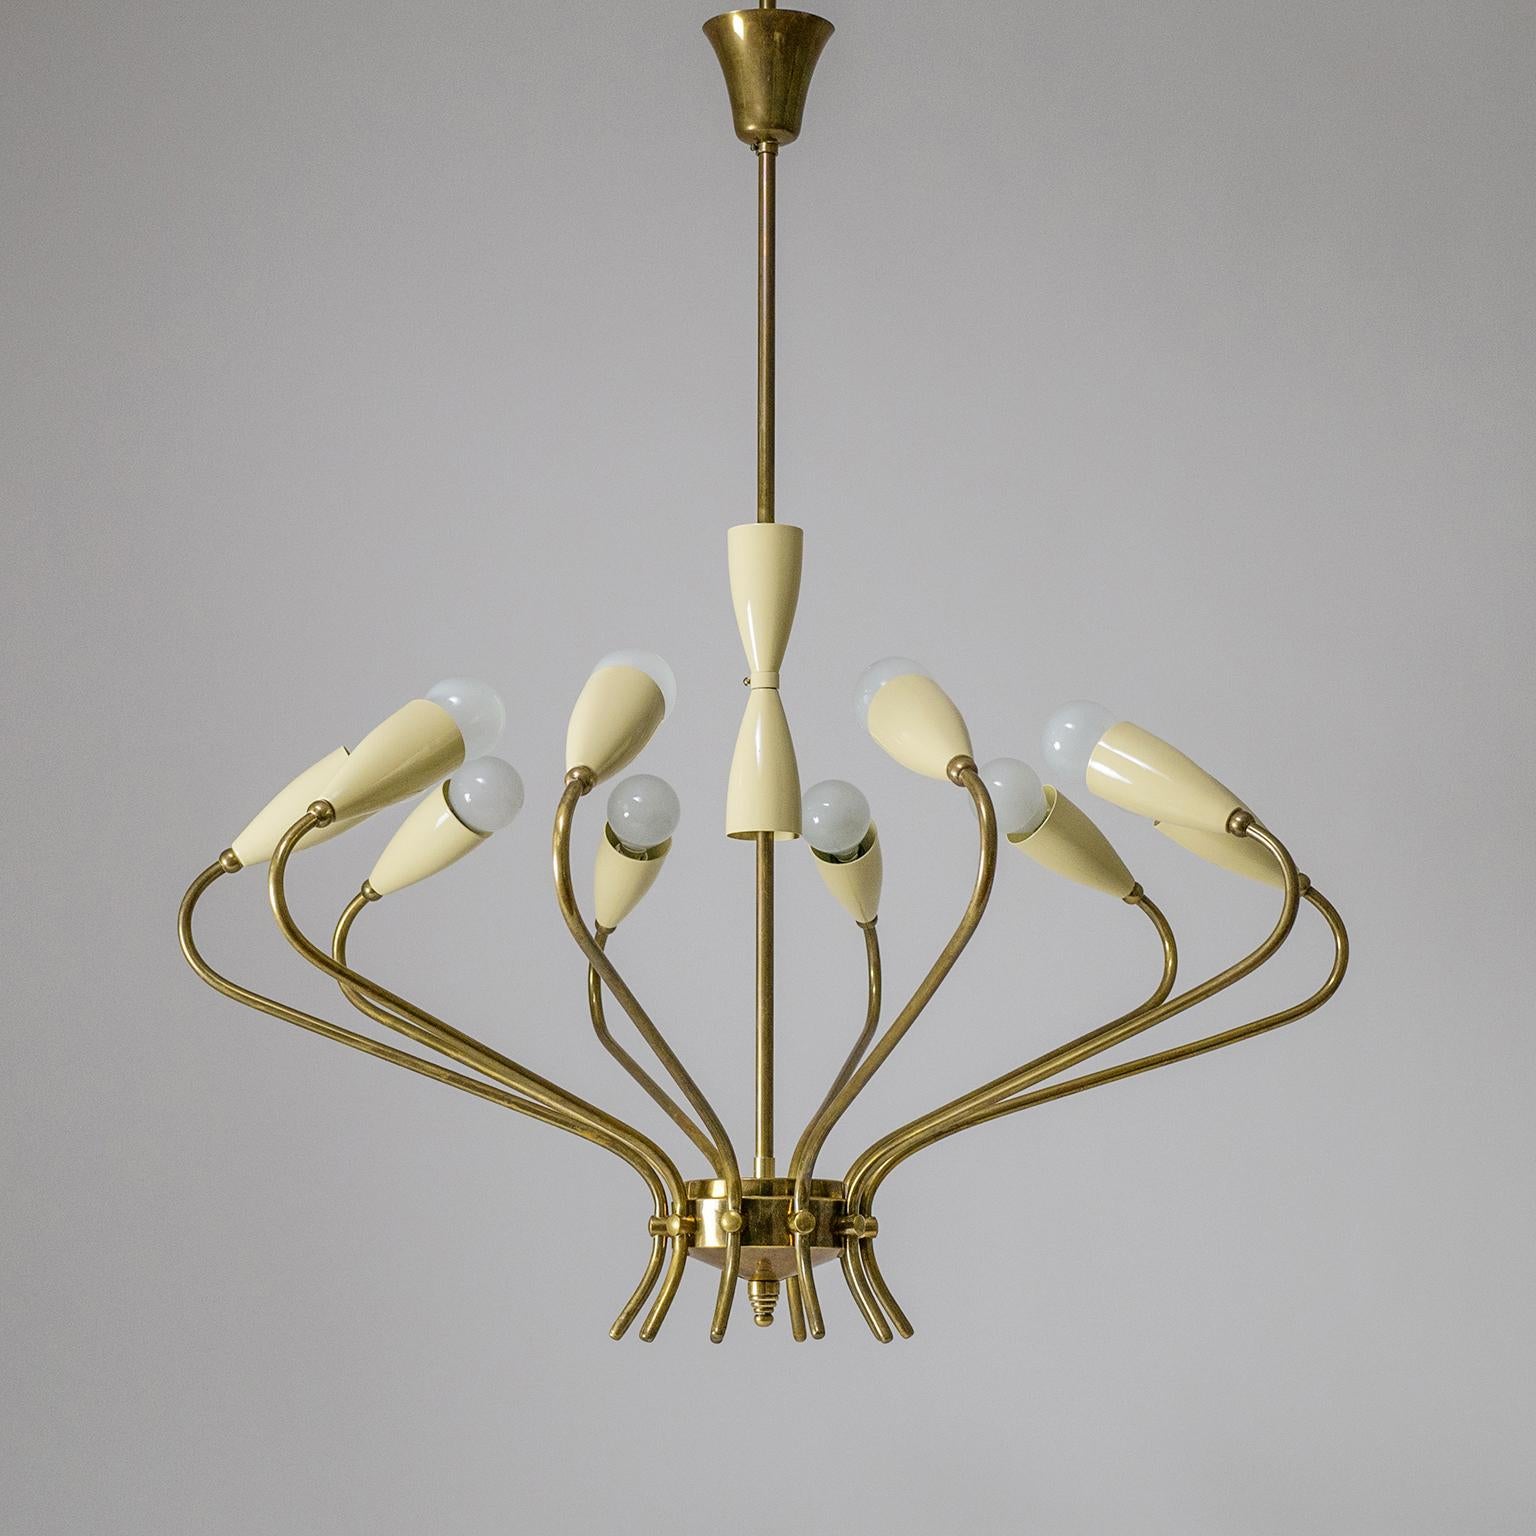 Beautiful crown shaped brass chandelier attributed to Lumi Milano, 1950s. Very unique design with ten sensuously curved brass arms, each with a cream colored aluminum cup and an original E14 socket. Very fine build quality with thick and sturdy